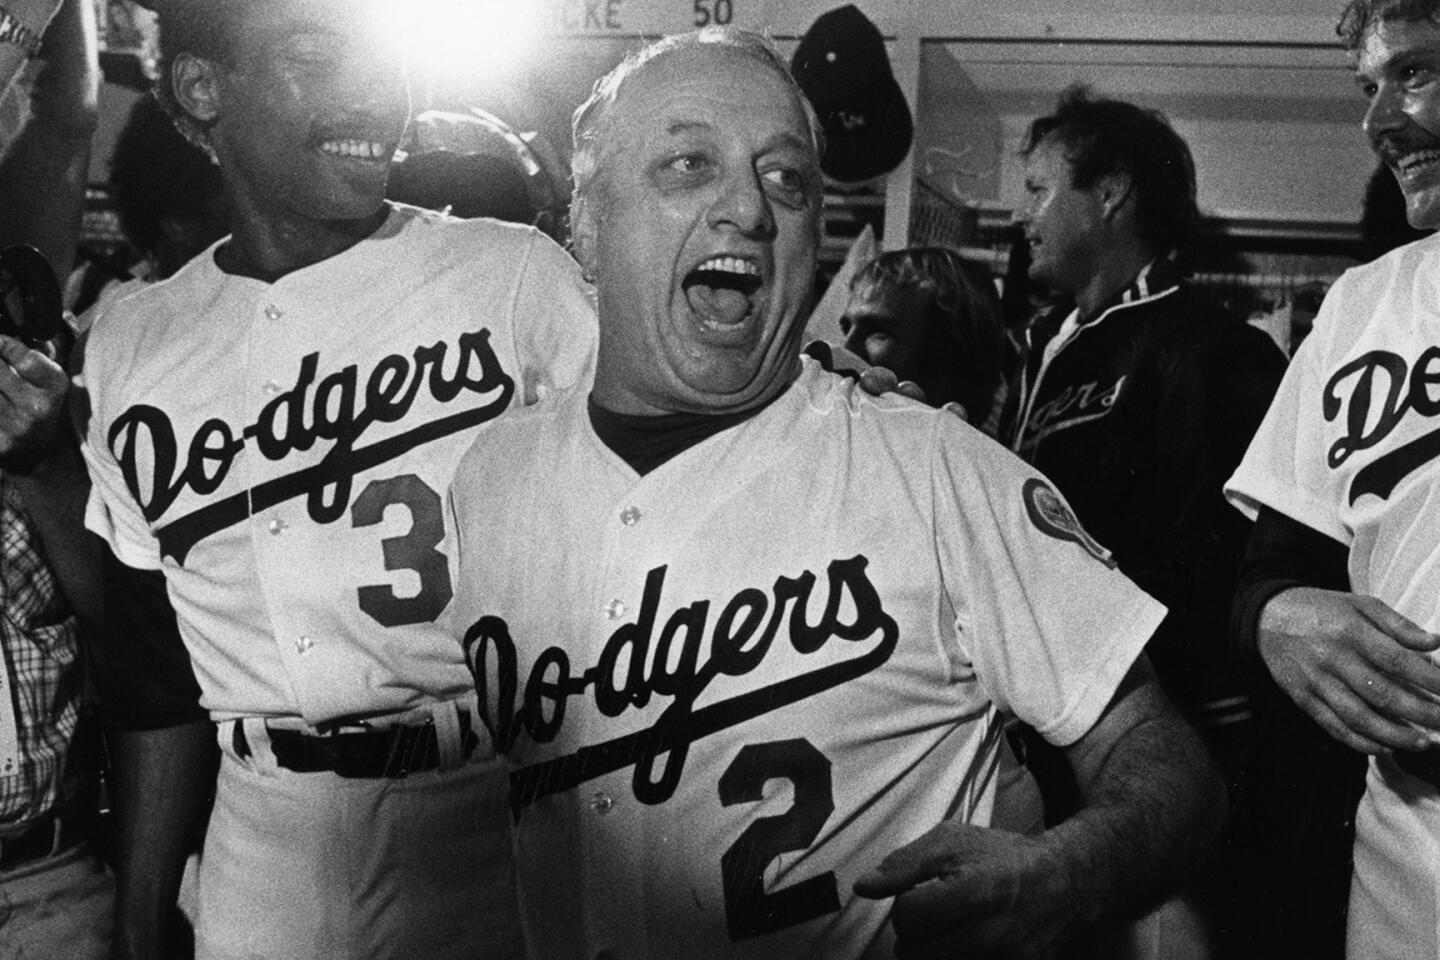 The 20 greatest Dodgers of all time, No. 8: Tommy Lasorda - Los